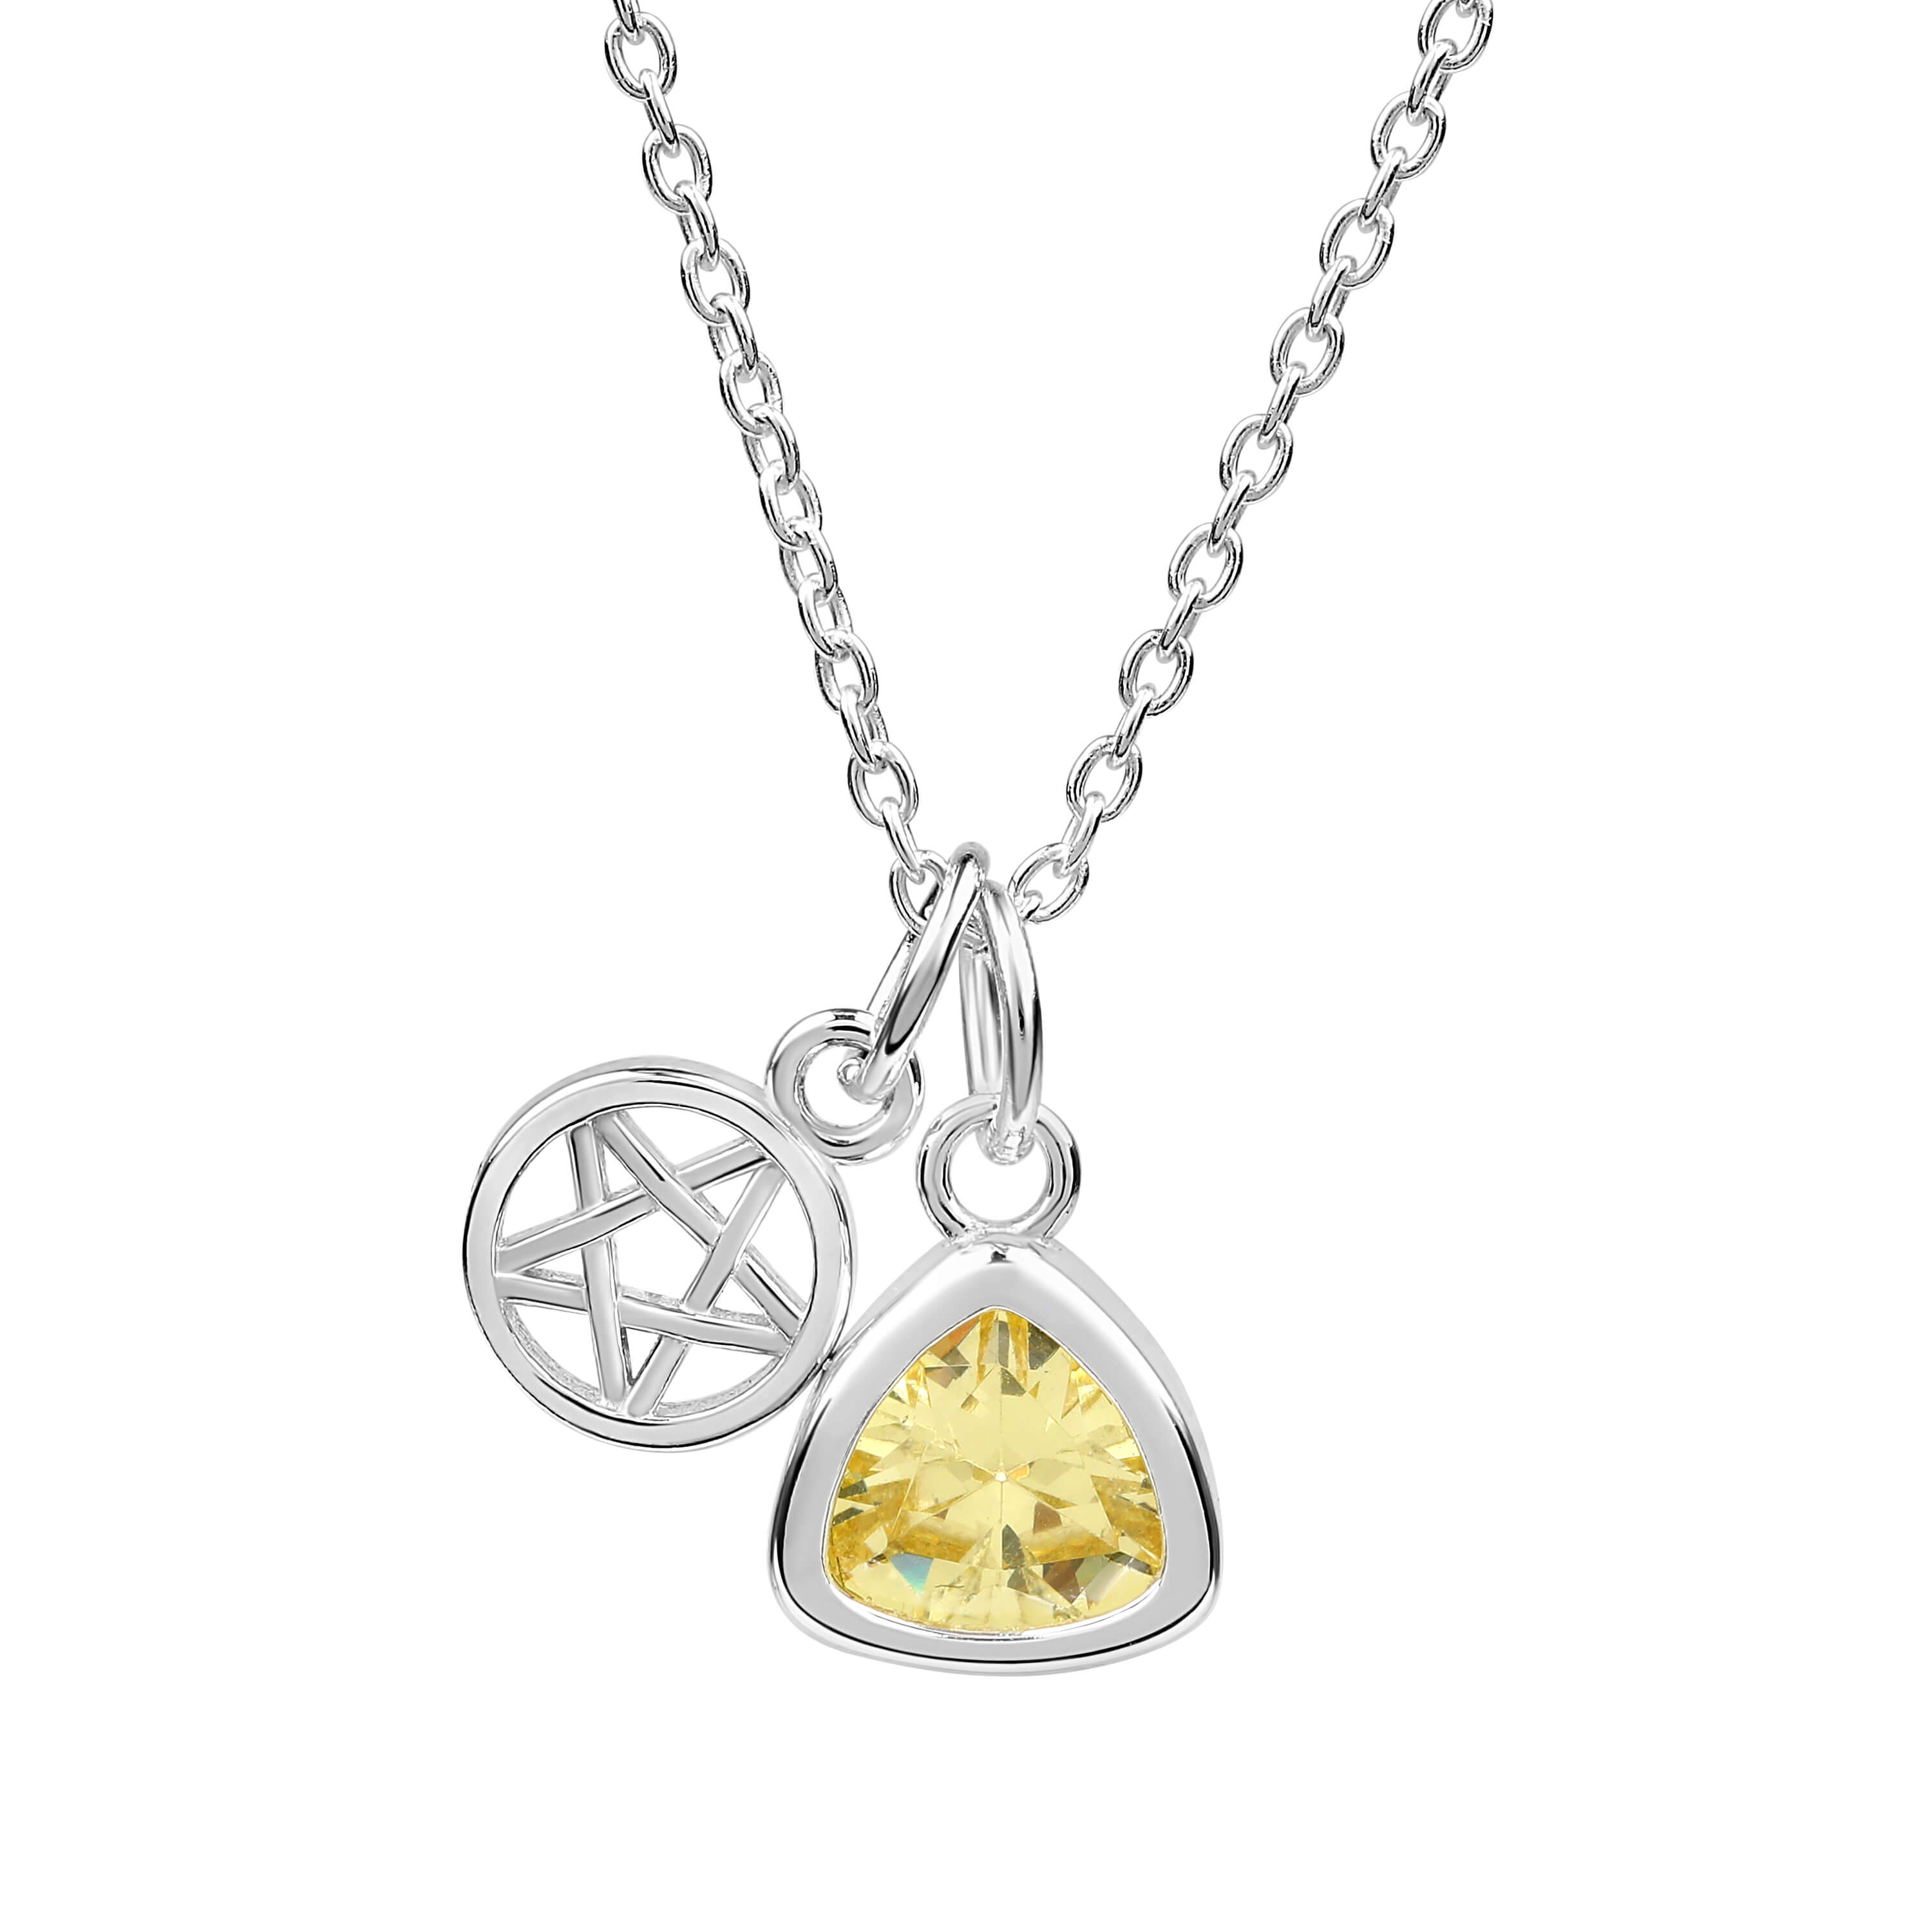 Pentacle Charm with Birthstone Necklace